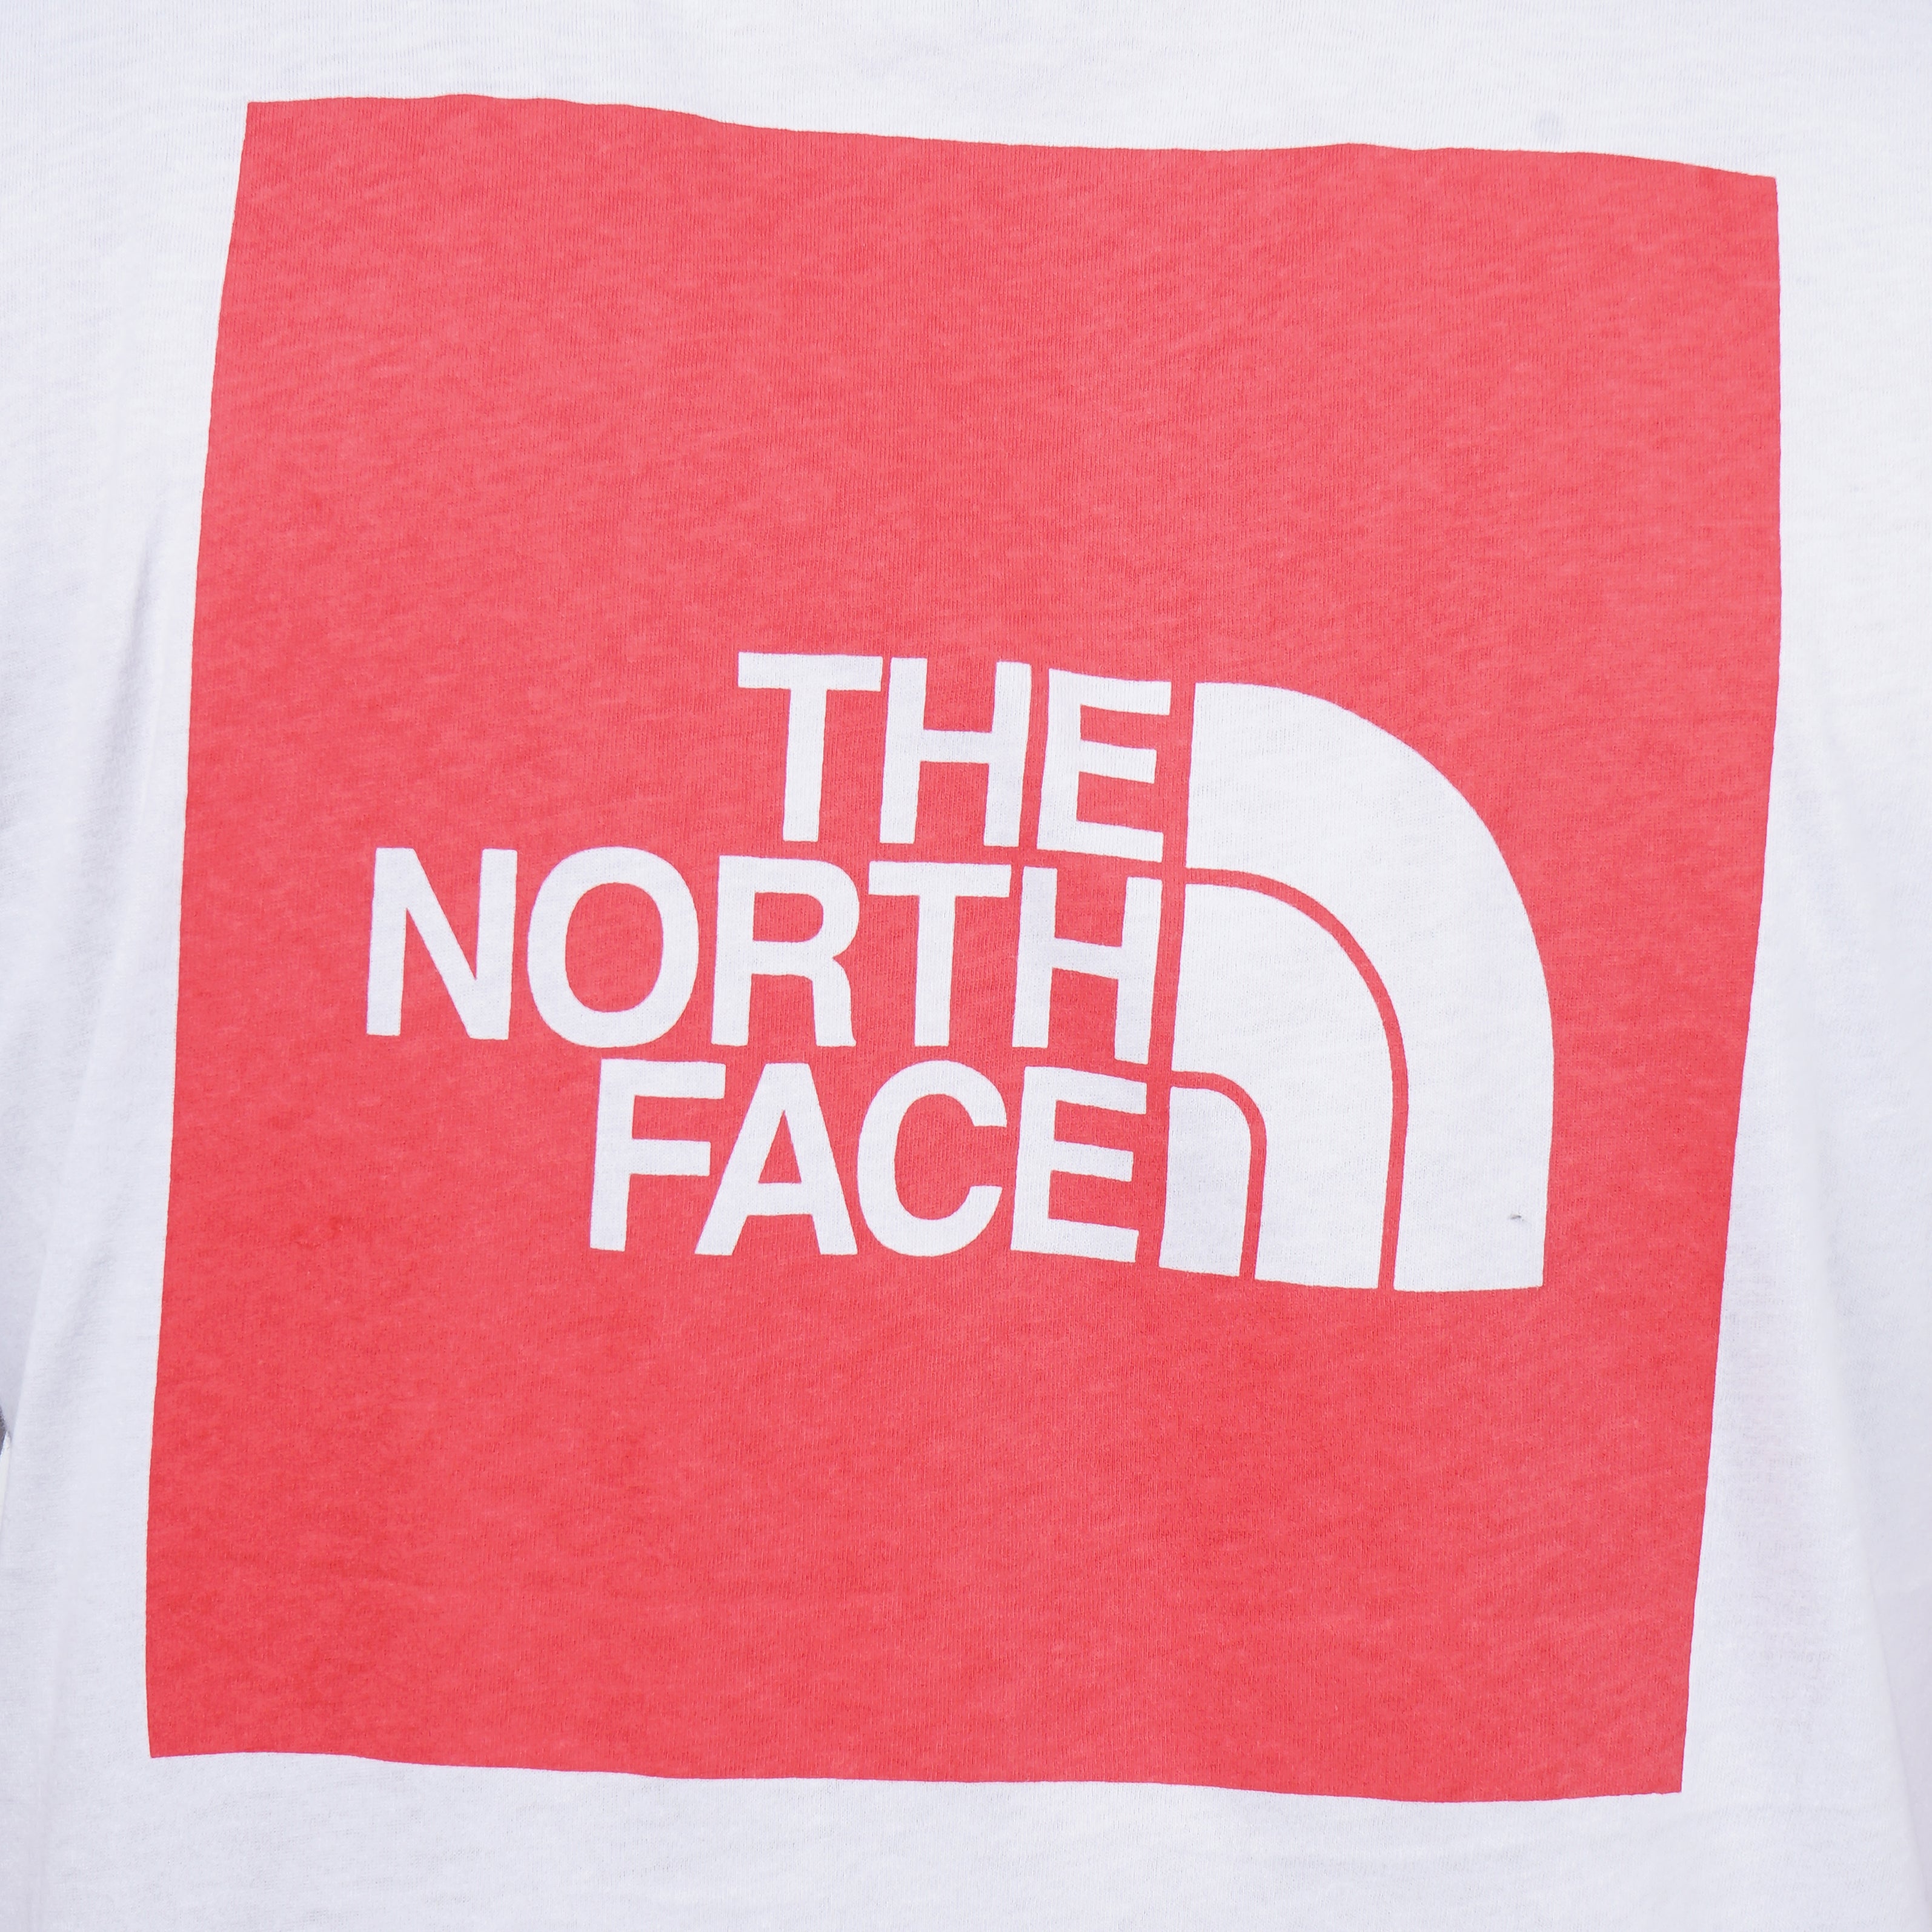 White t-shirt with red The North Face logo, outdoor apparel brand merchandise.